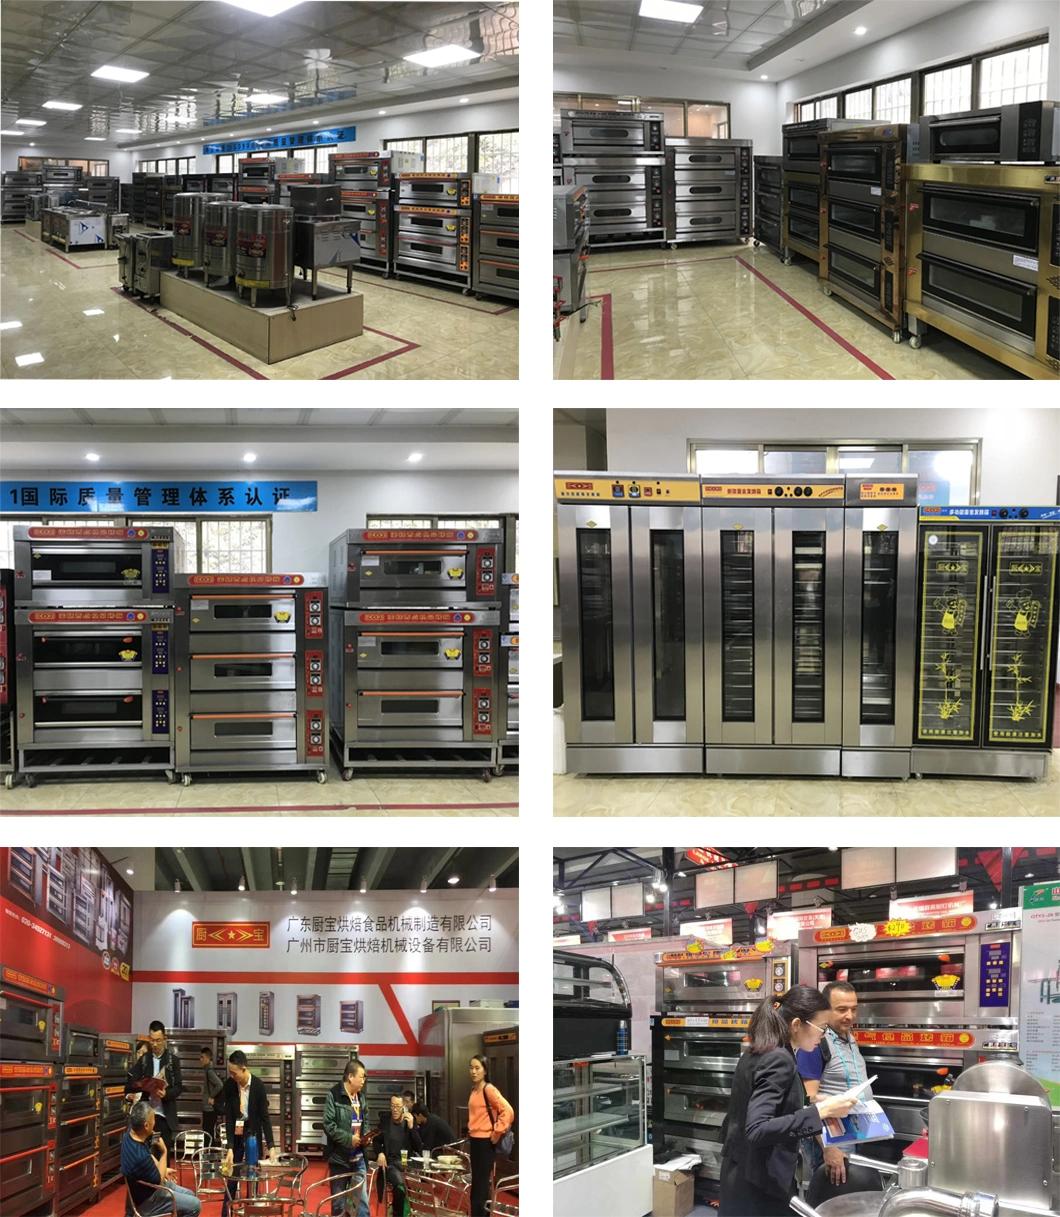 4 Deck 16 Trays Gas Pizza Oven for Commericial Kitchen Baking Equipment Bakery Machinery Food Machine